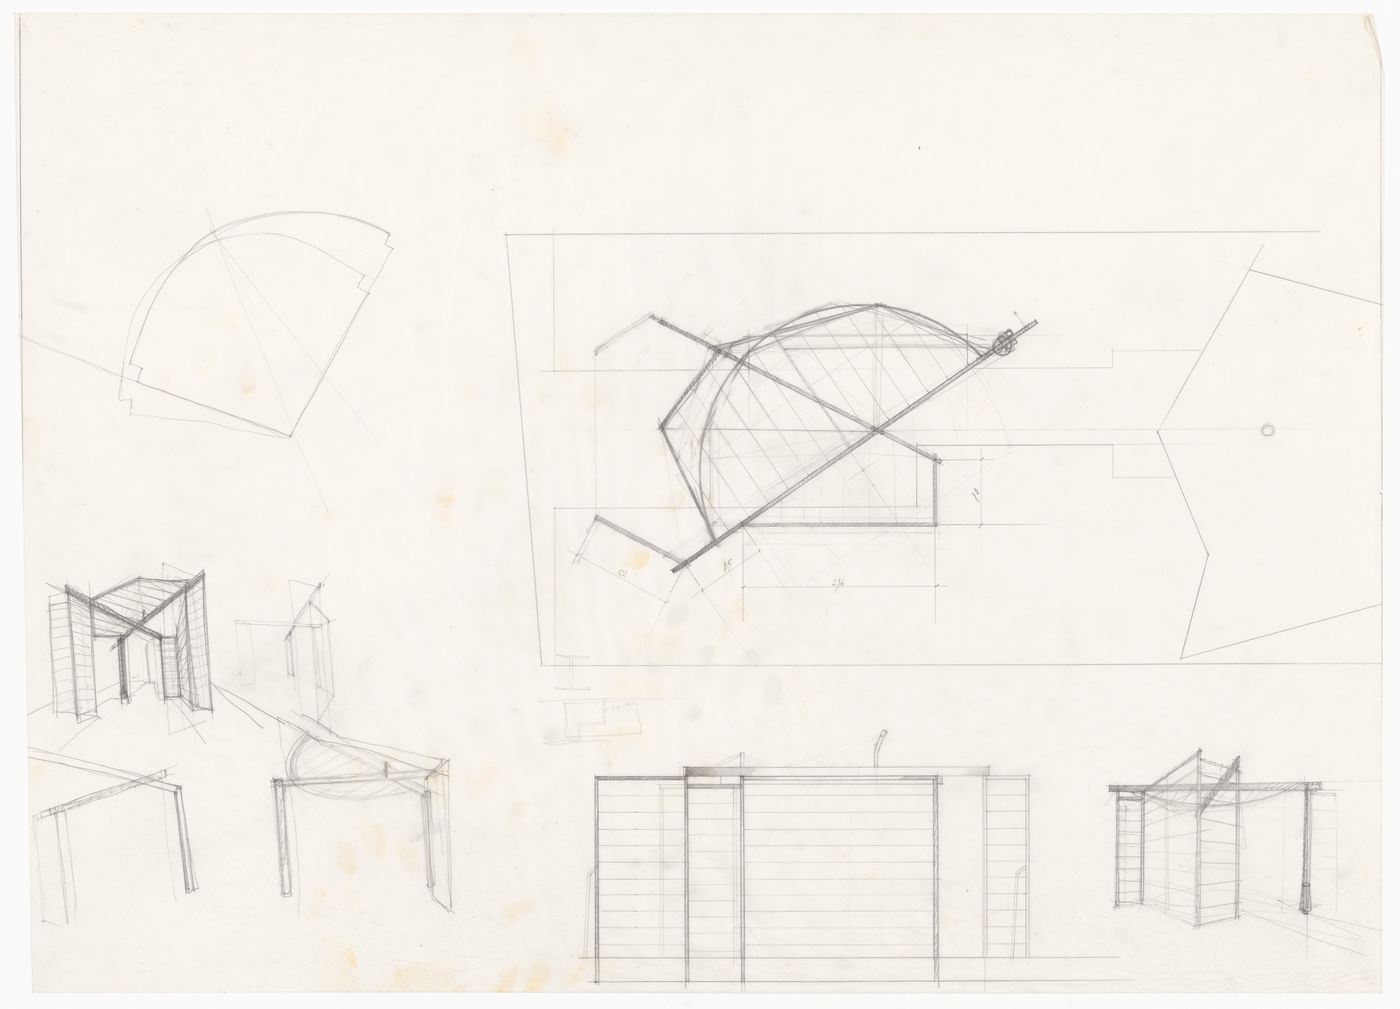 Plans, perspectives and elevations for Casa Frea, Milan, Italy